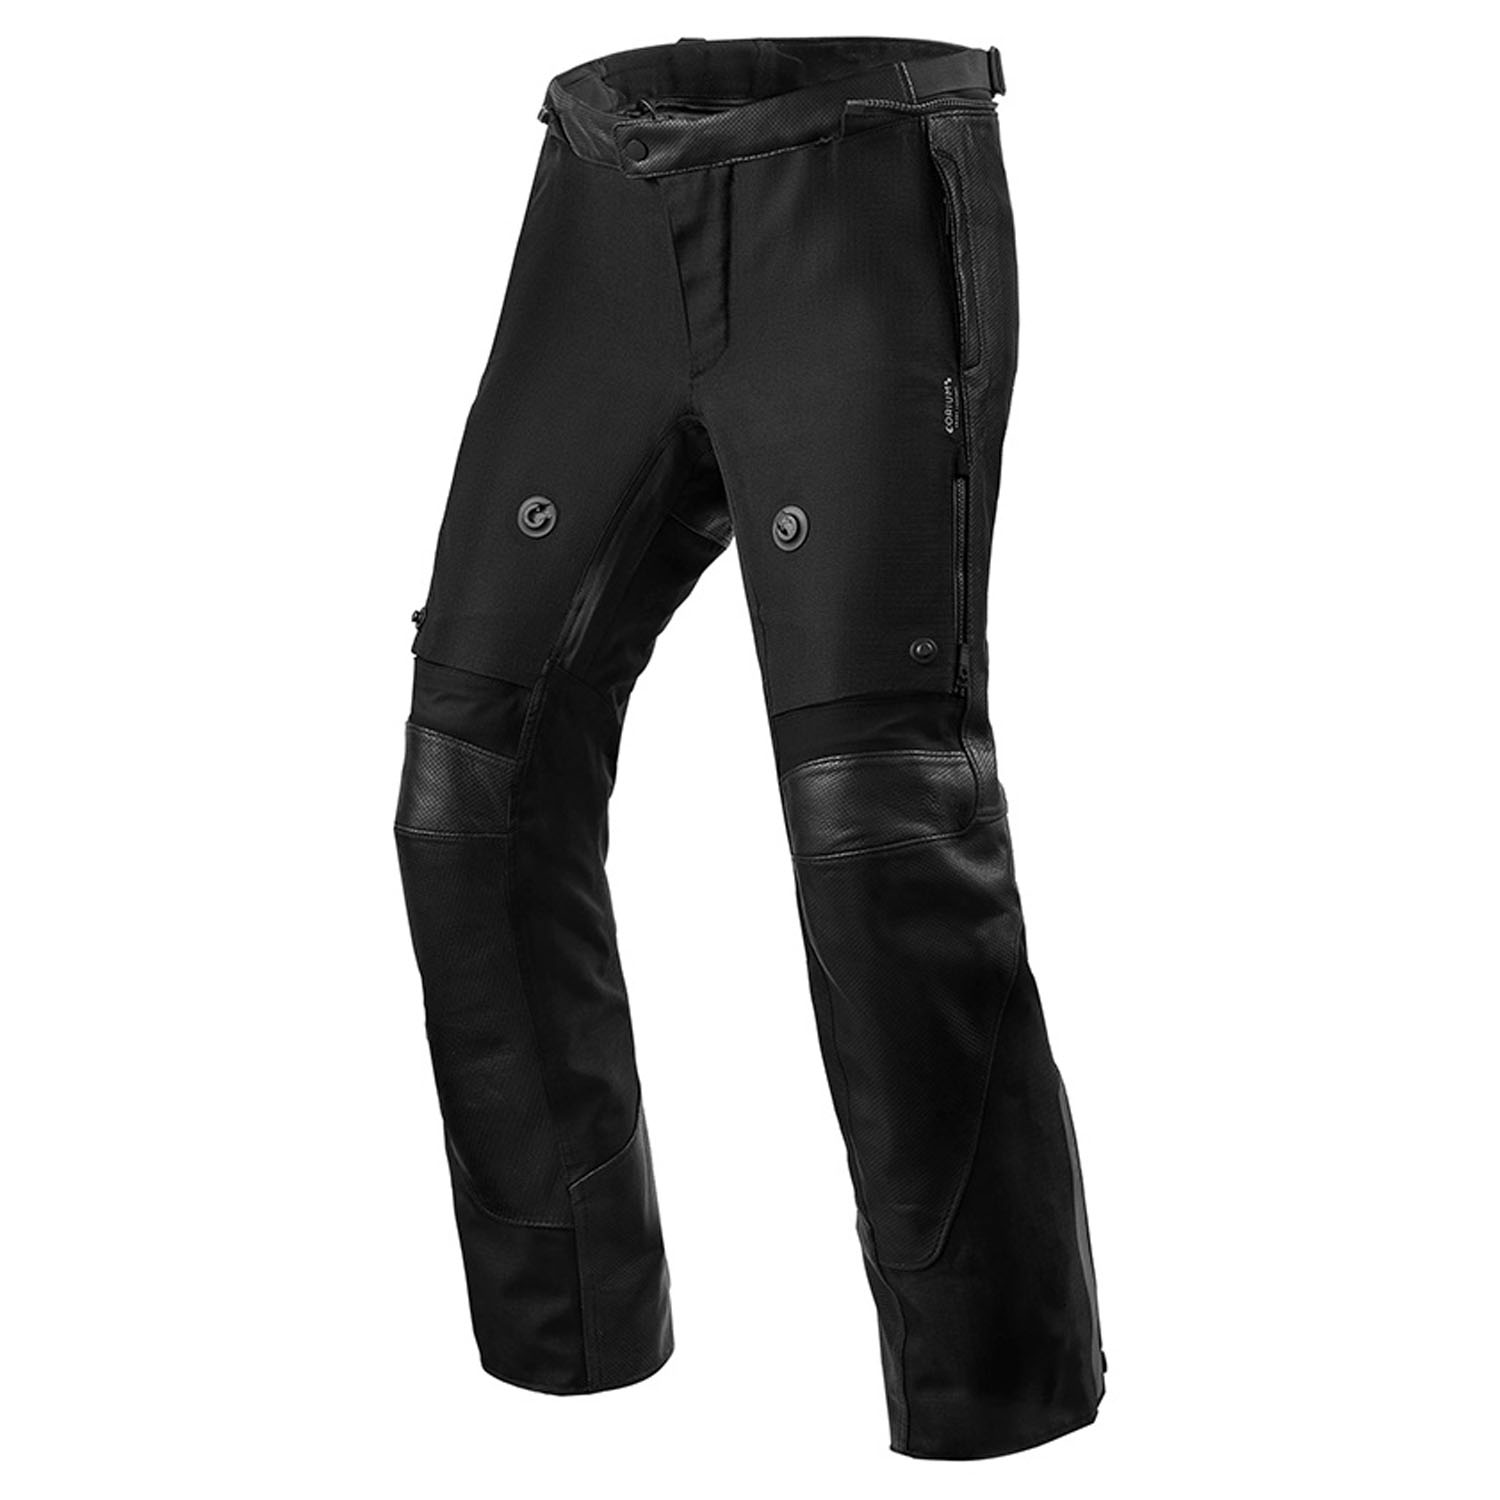 Image of REV'IT! Trousers Valve H2O Black Standard Motorcycle Pants Size 46 ID 8700001315784